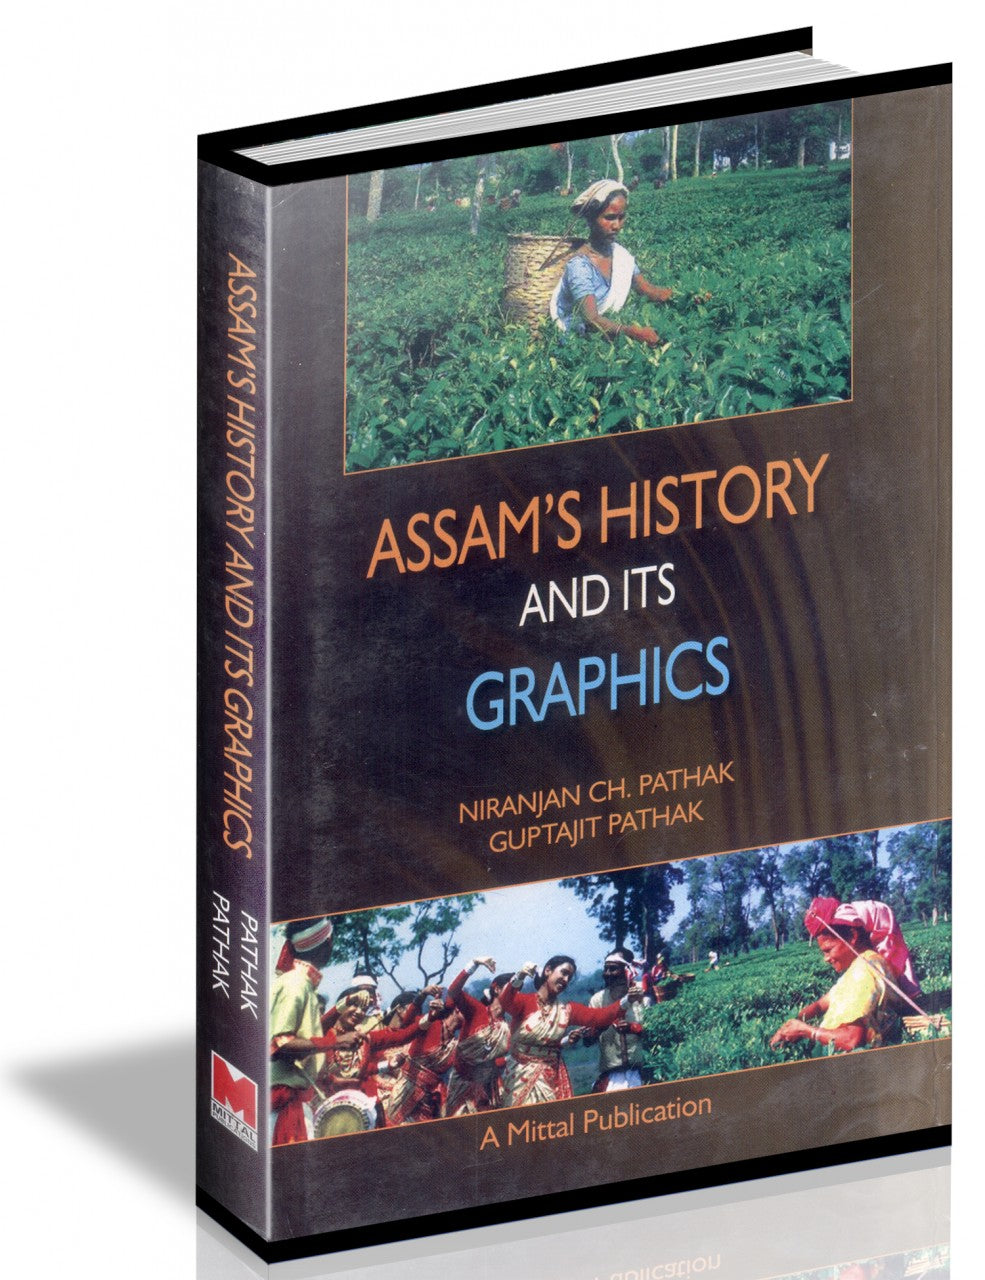 Assam's History and its Graphics